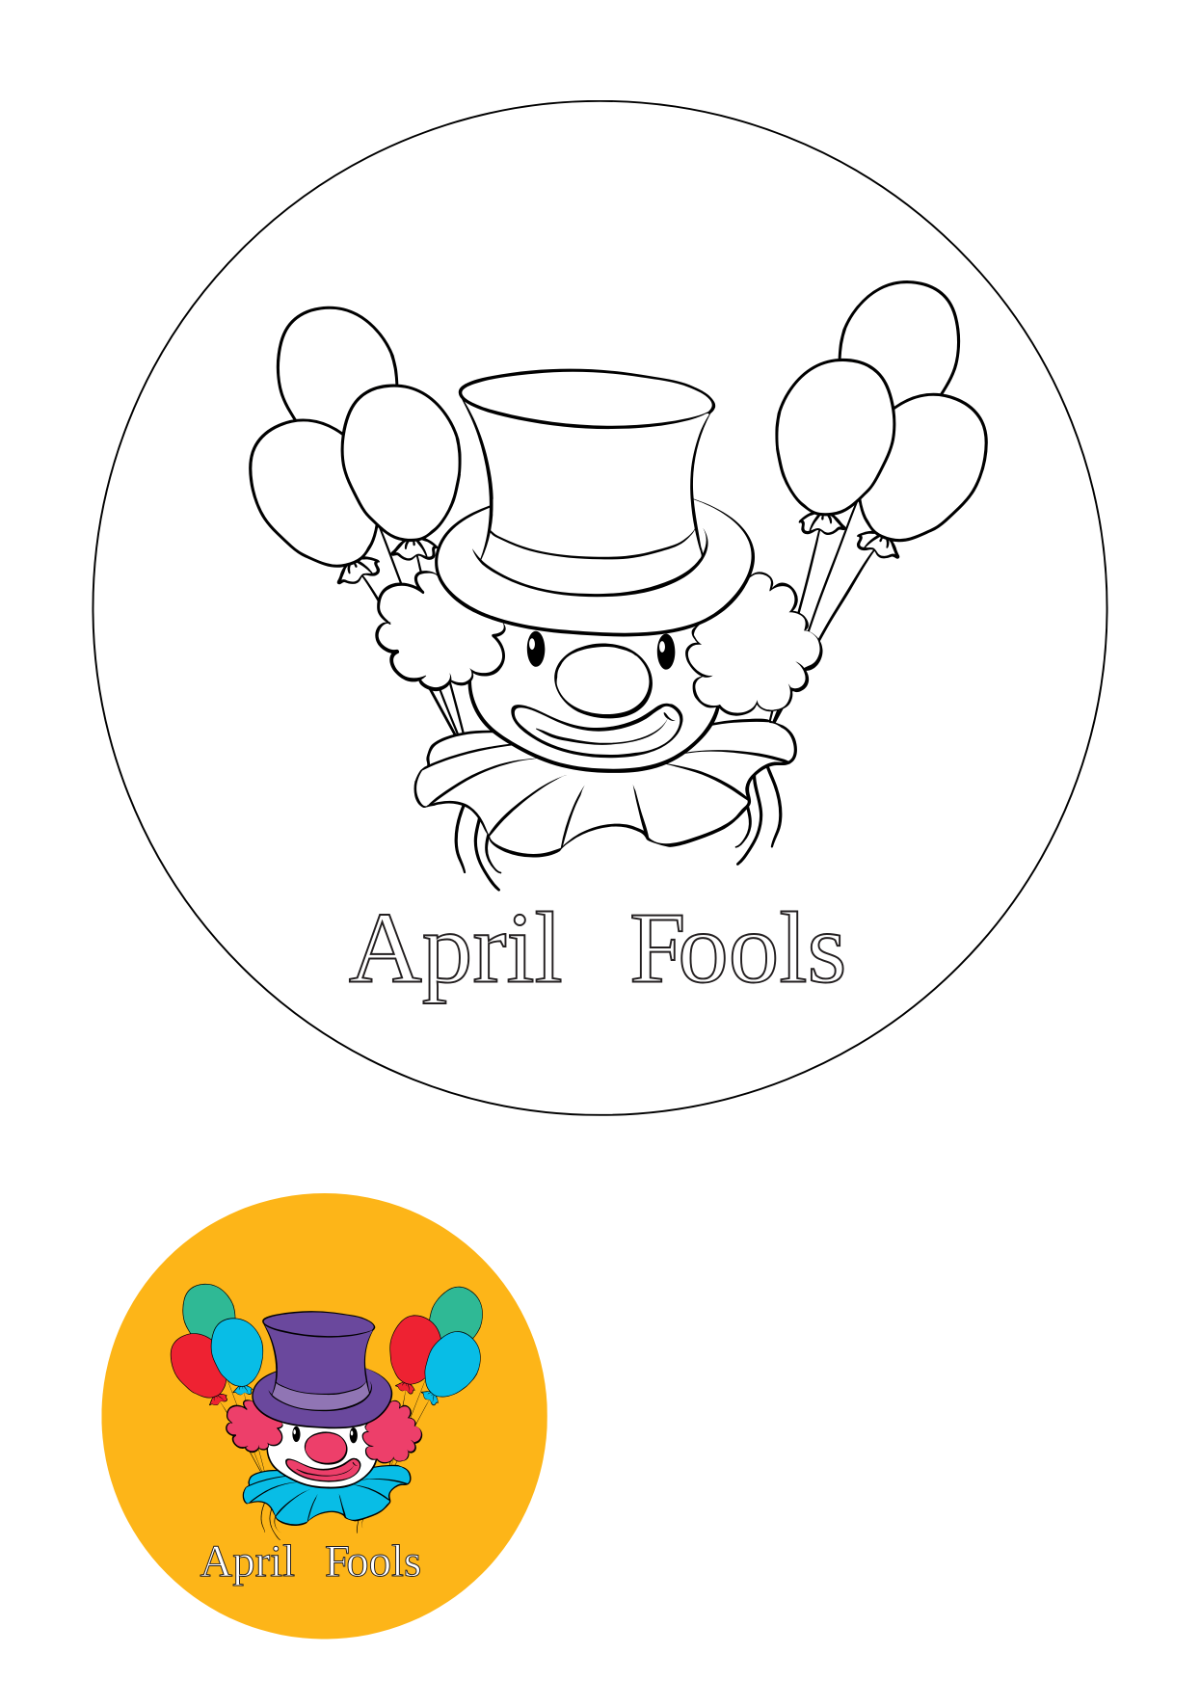 April Fools’ Day Coloring Page for kids Template